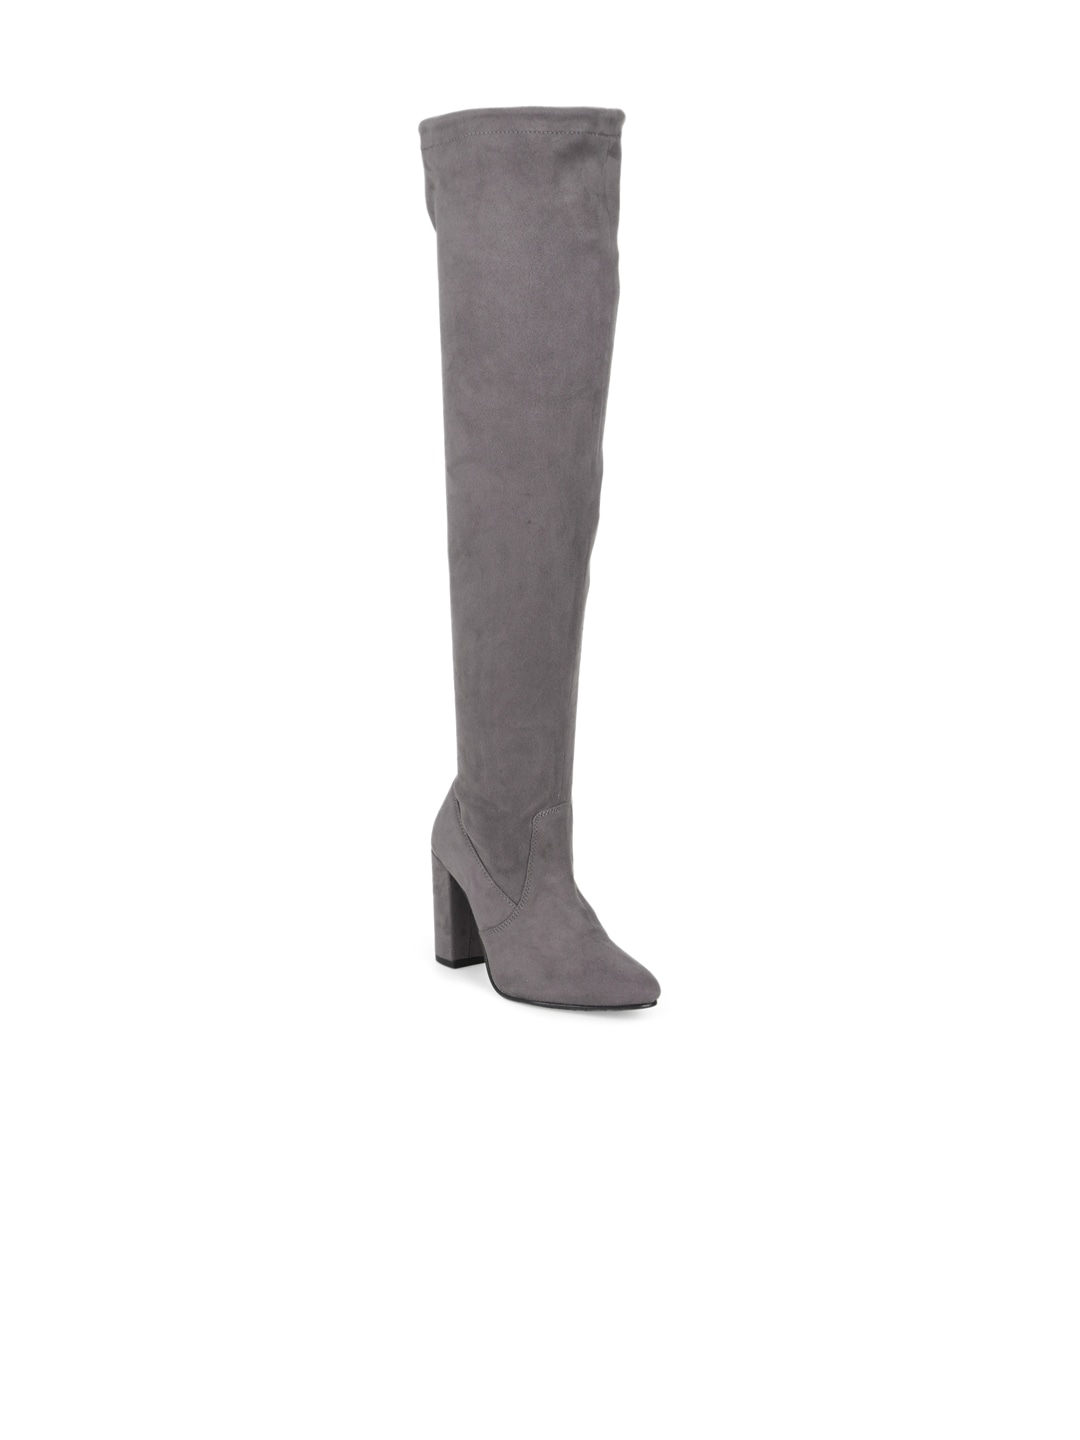 Truffle Collection Grey Textured High-Top Block Heeled Boots Price in India